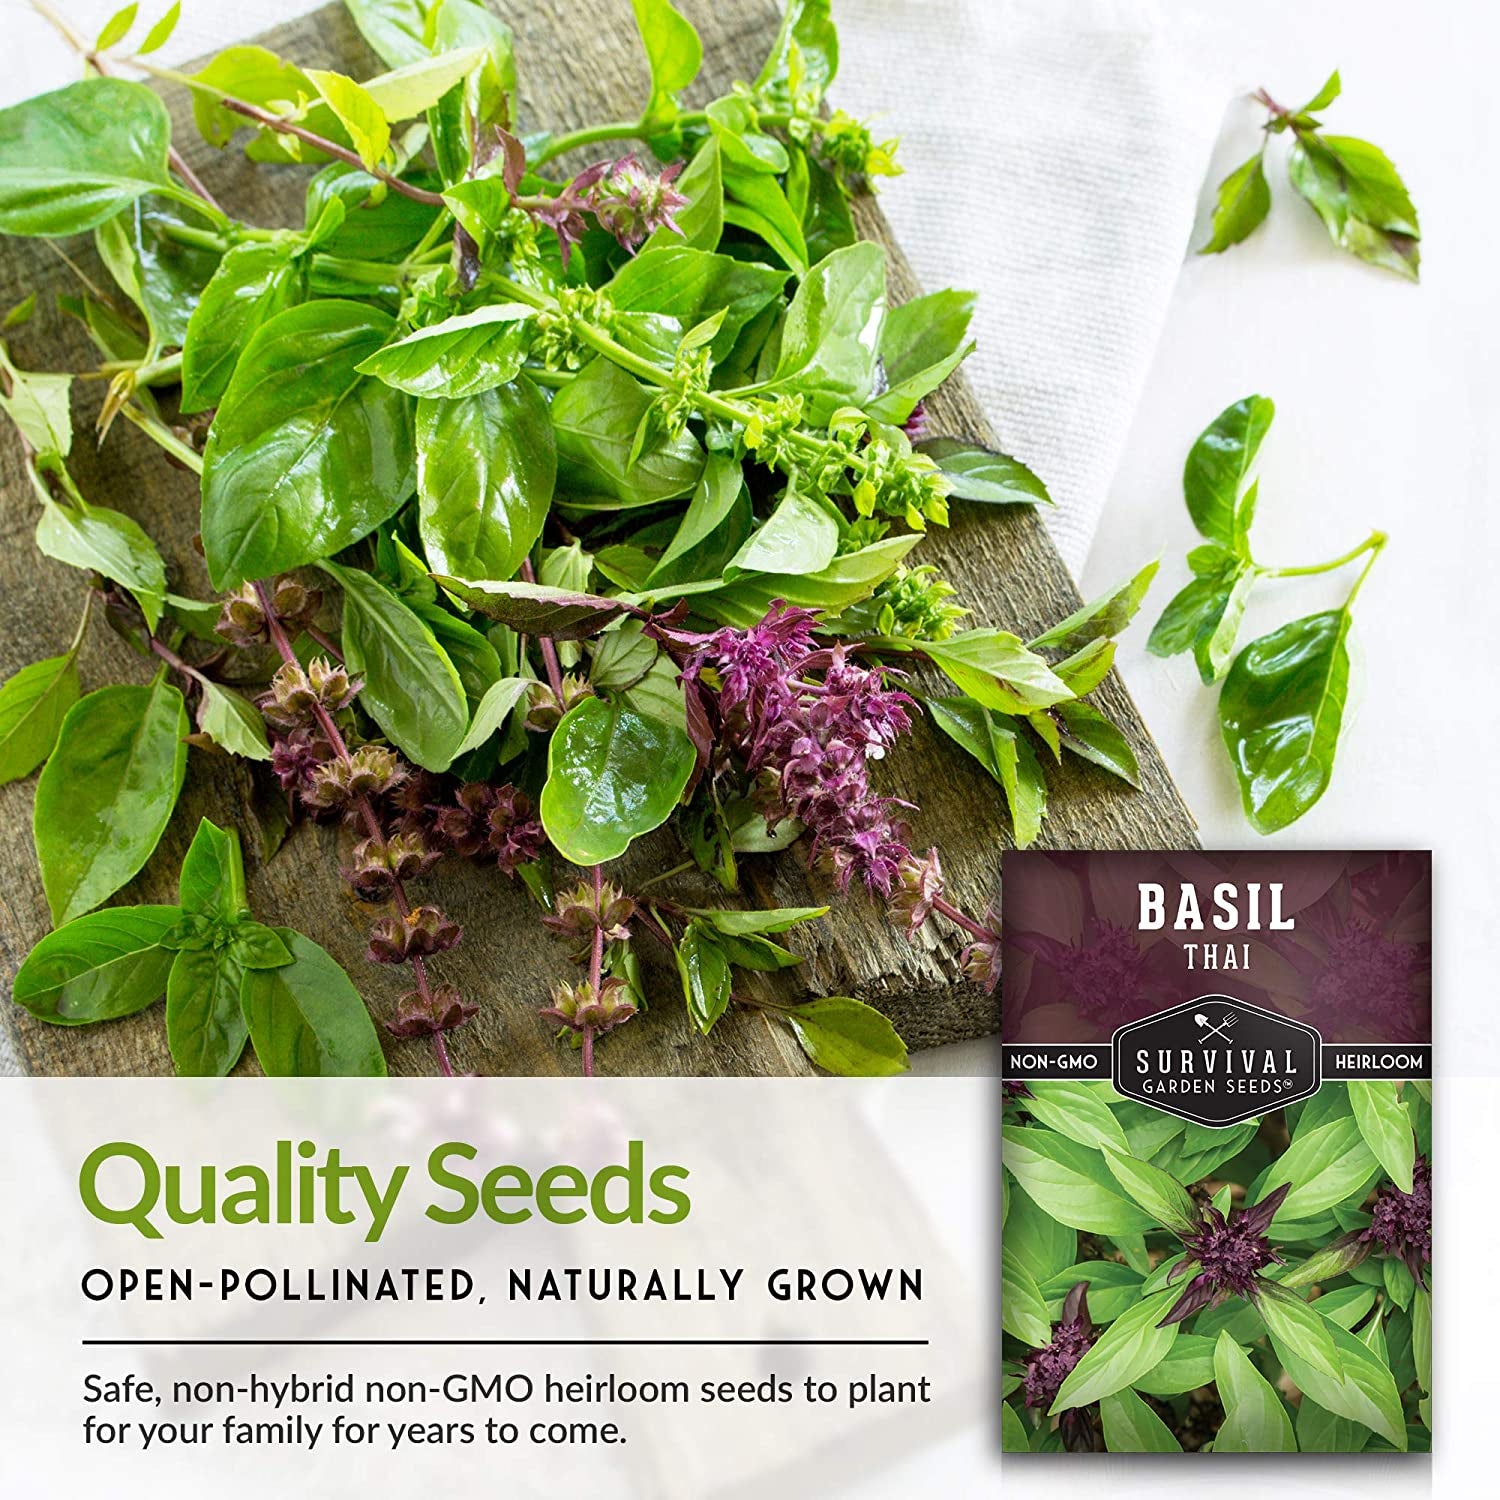 - Thai Basil Seed for Planting - Packet with Instructions to Plant and Grow Asian Basil Indoors or Outdoors in Your Home Vegetable Garden - Non-Gmo Heirloom Variety - 5 Pack